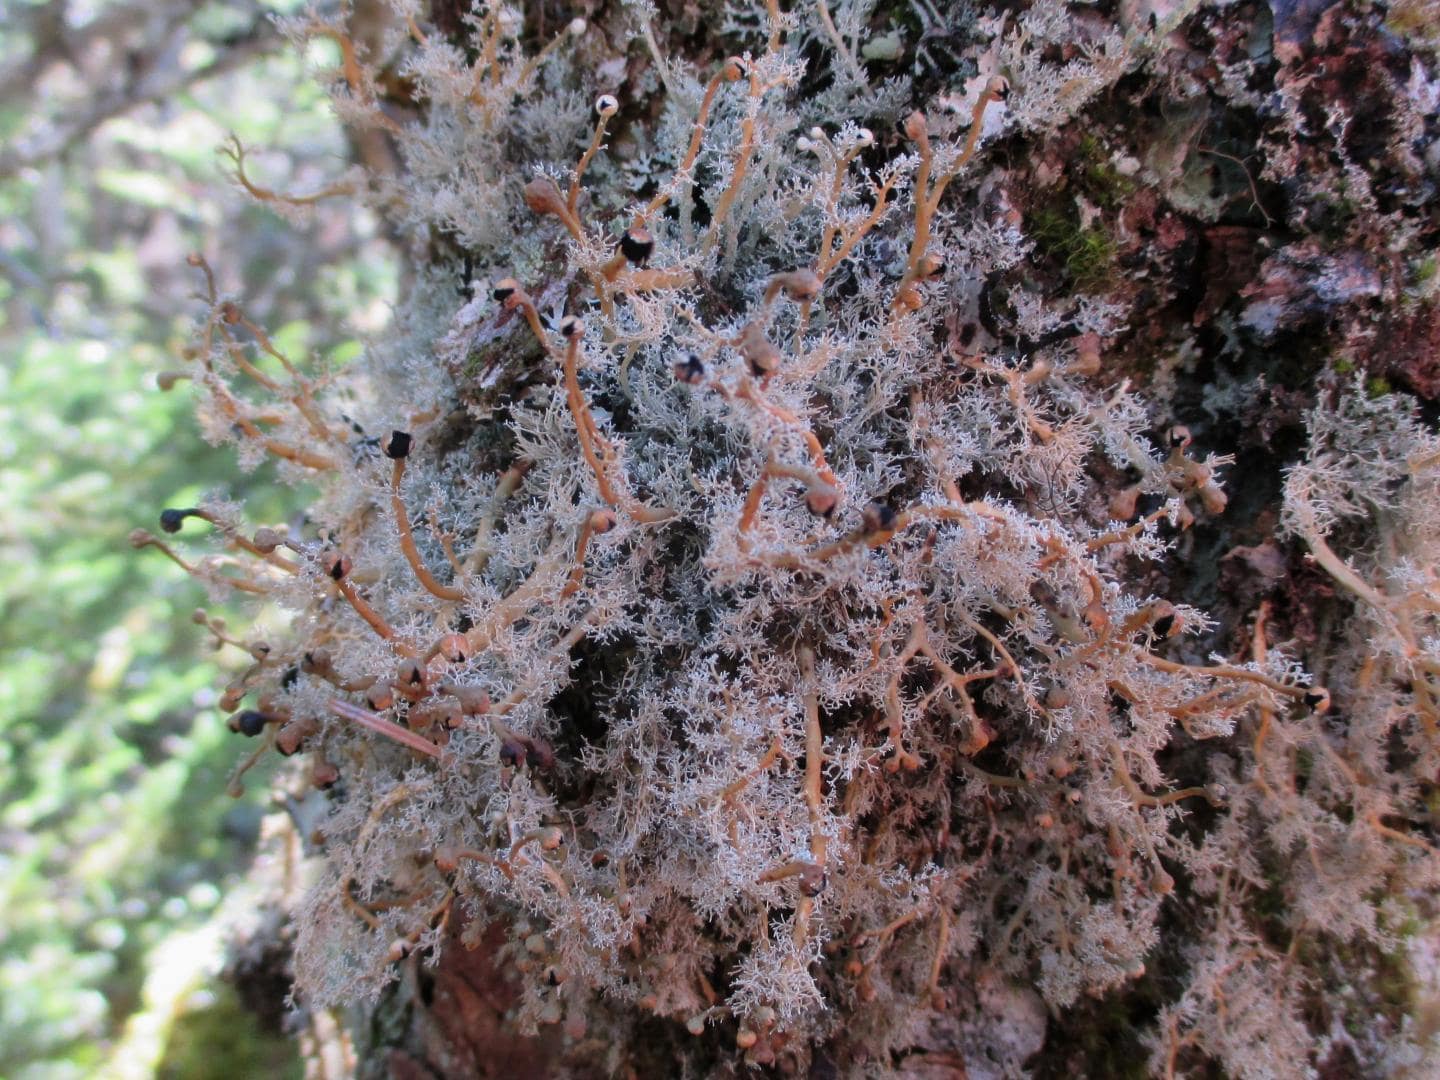 white and light orange springy looking lichen attached to a tree